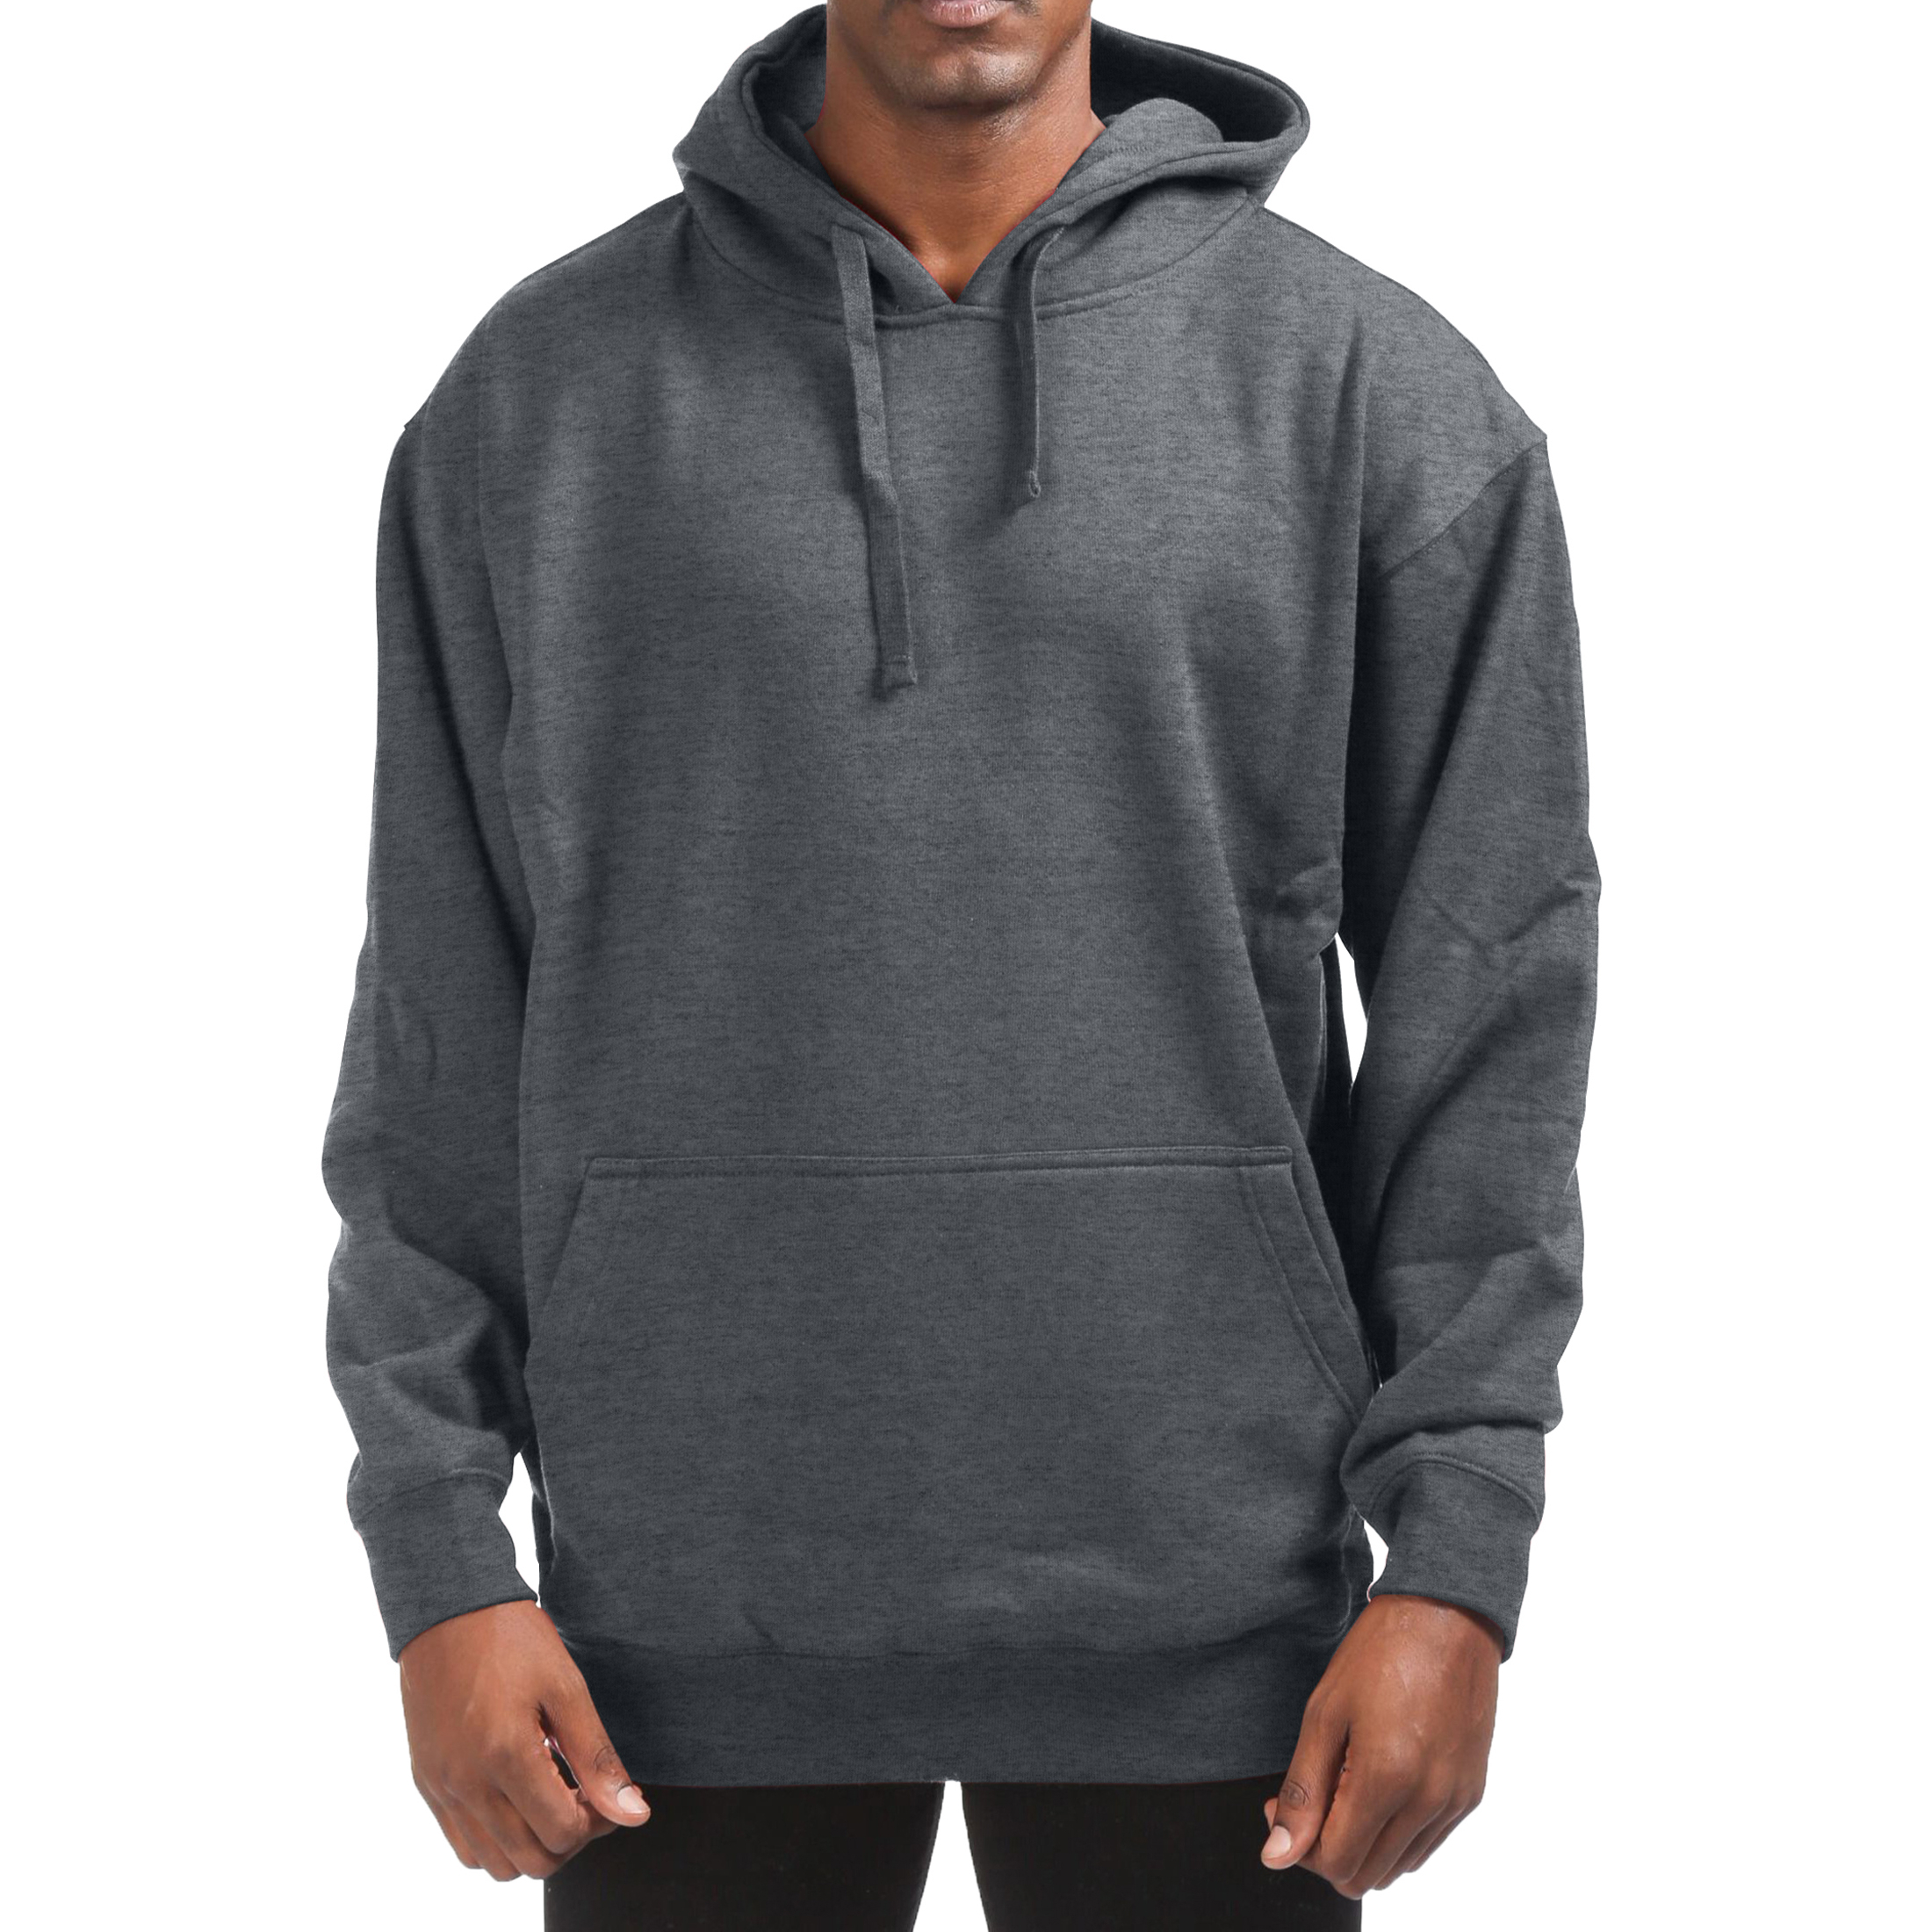 Men's Cotton-Blend Fleece Pullover Hoodie With Pocket (Big & Tall Sizes Available) - Charcoal, Small